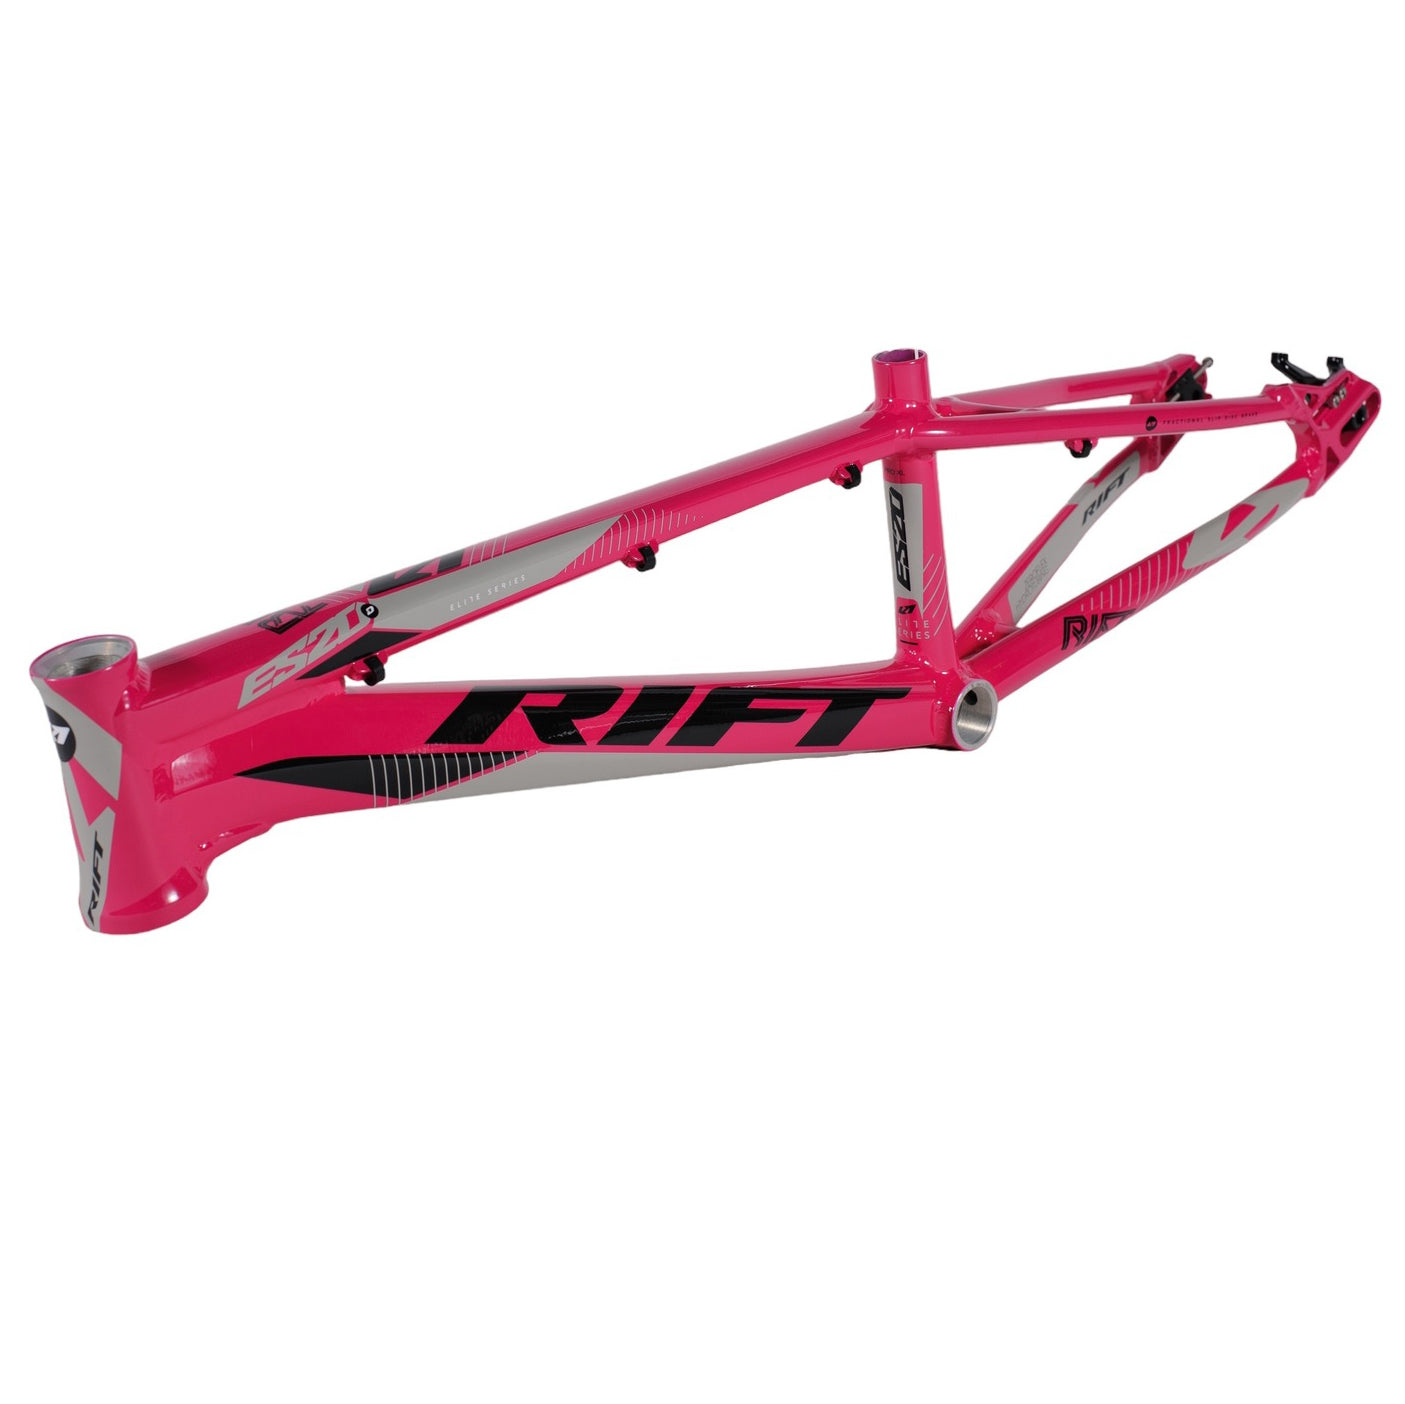 The Rift ES20 Frame Mini is a lightweight and durable youth frame featuring a V-brake design. With its 10mm dropout and multiple caliper mount options, this frame is perfect for